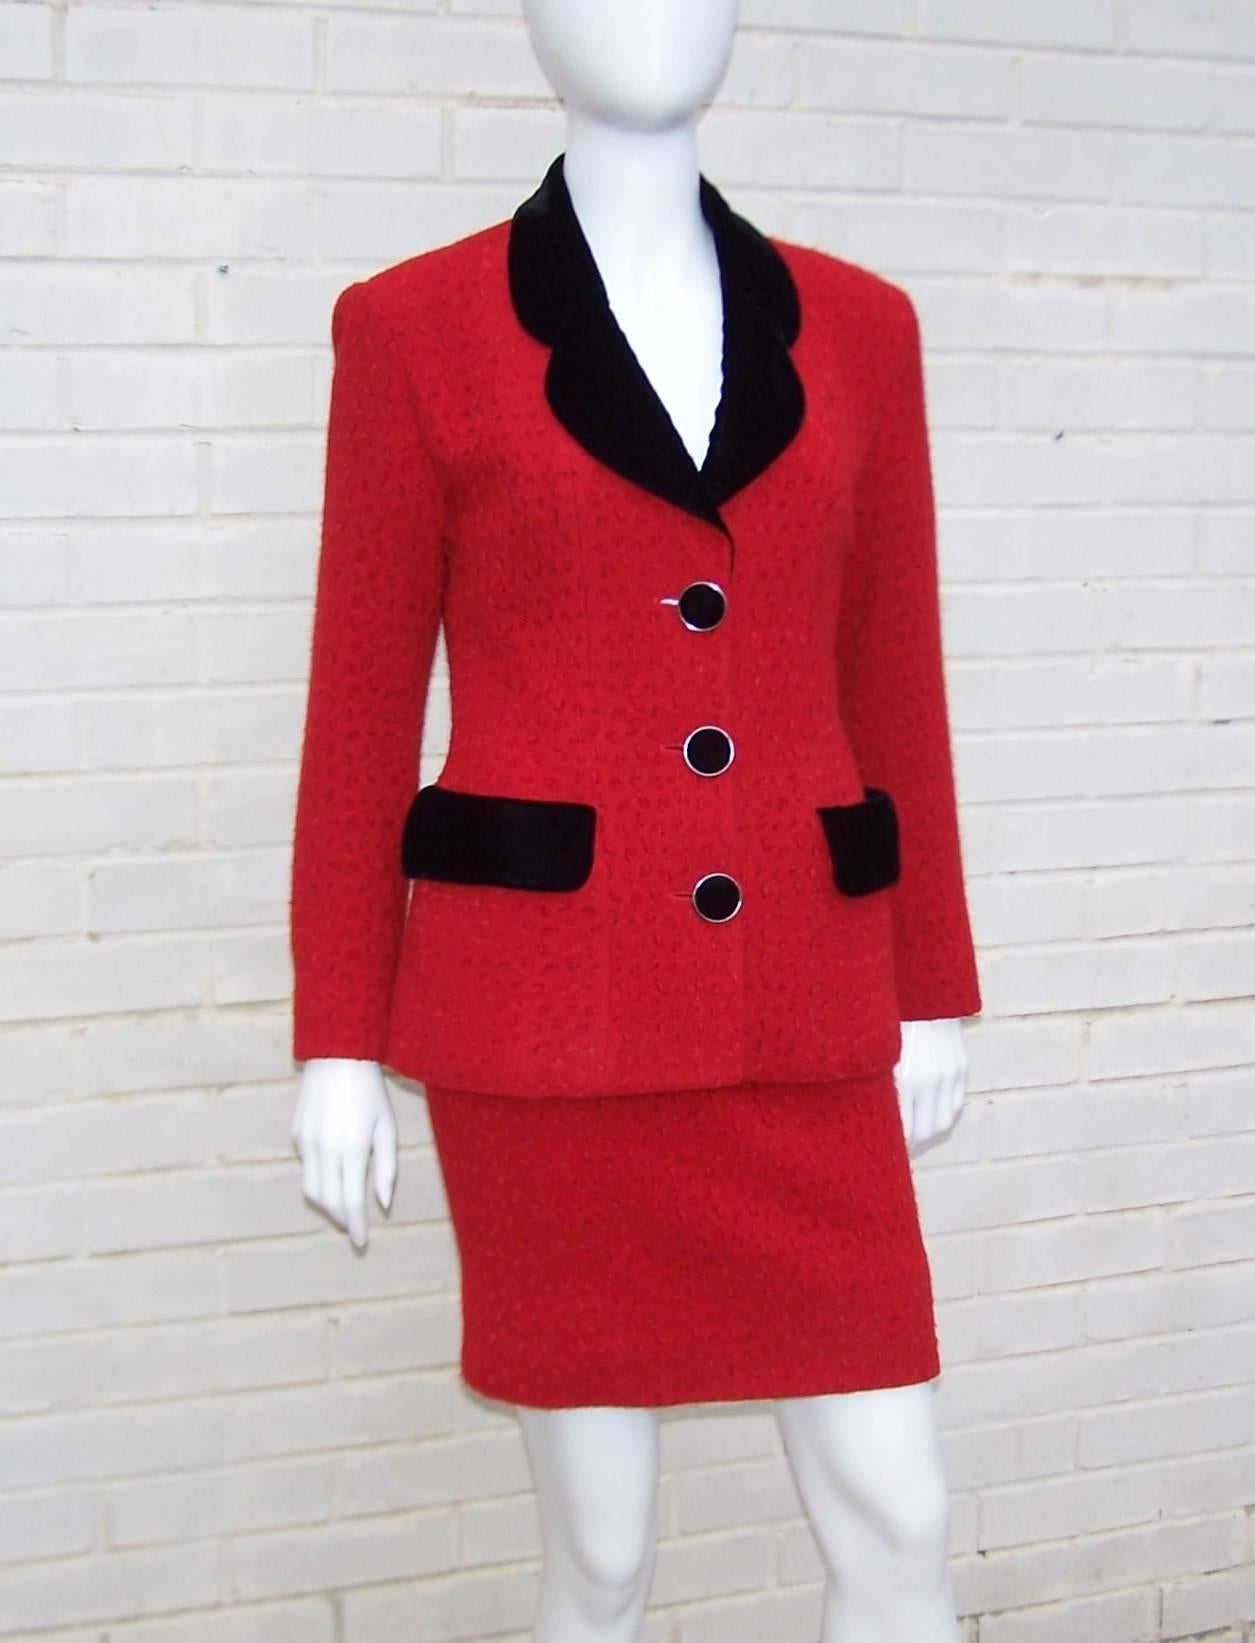 This beautiful red wool suit by Karl Lagerfeld is reminiscent of his designs for Chanel.  Classically cut with a textural red wool blend fabric that has the cozy feel of knitwear, the rich color is accented by black velvet collar, pocket flaps and